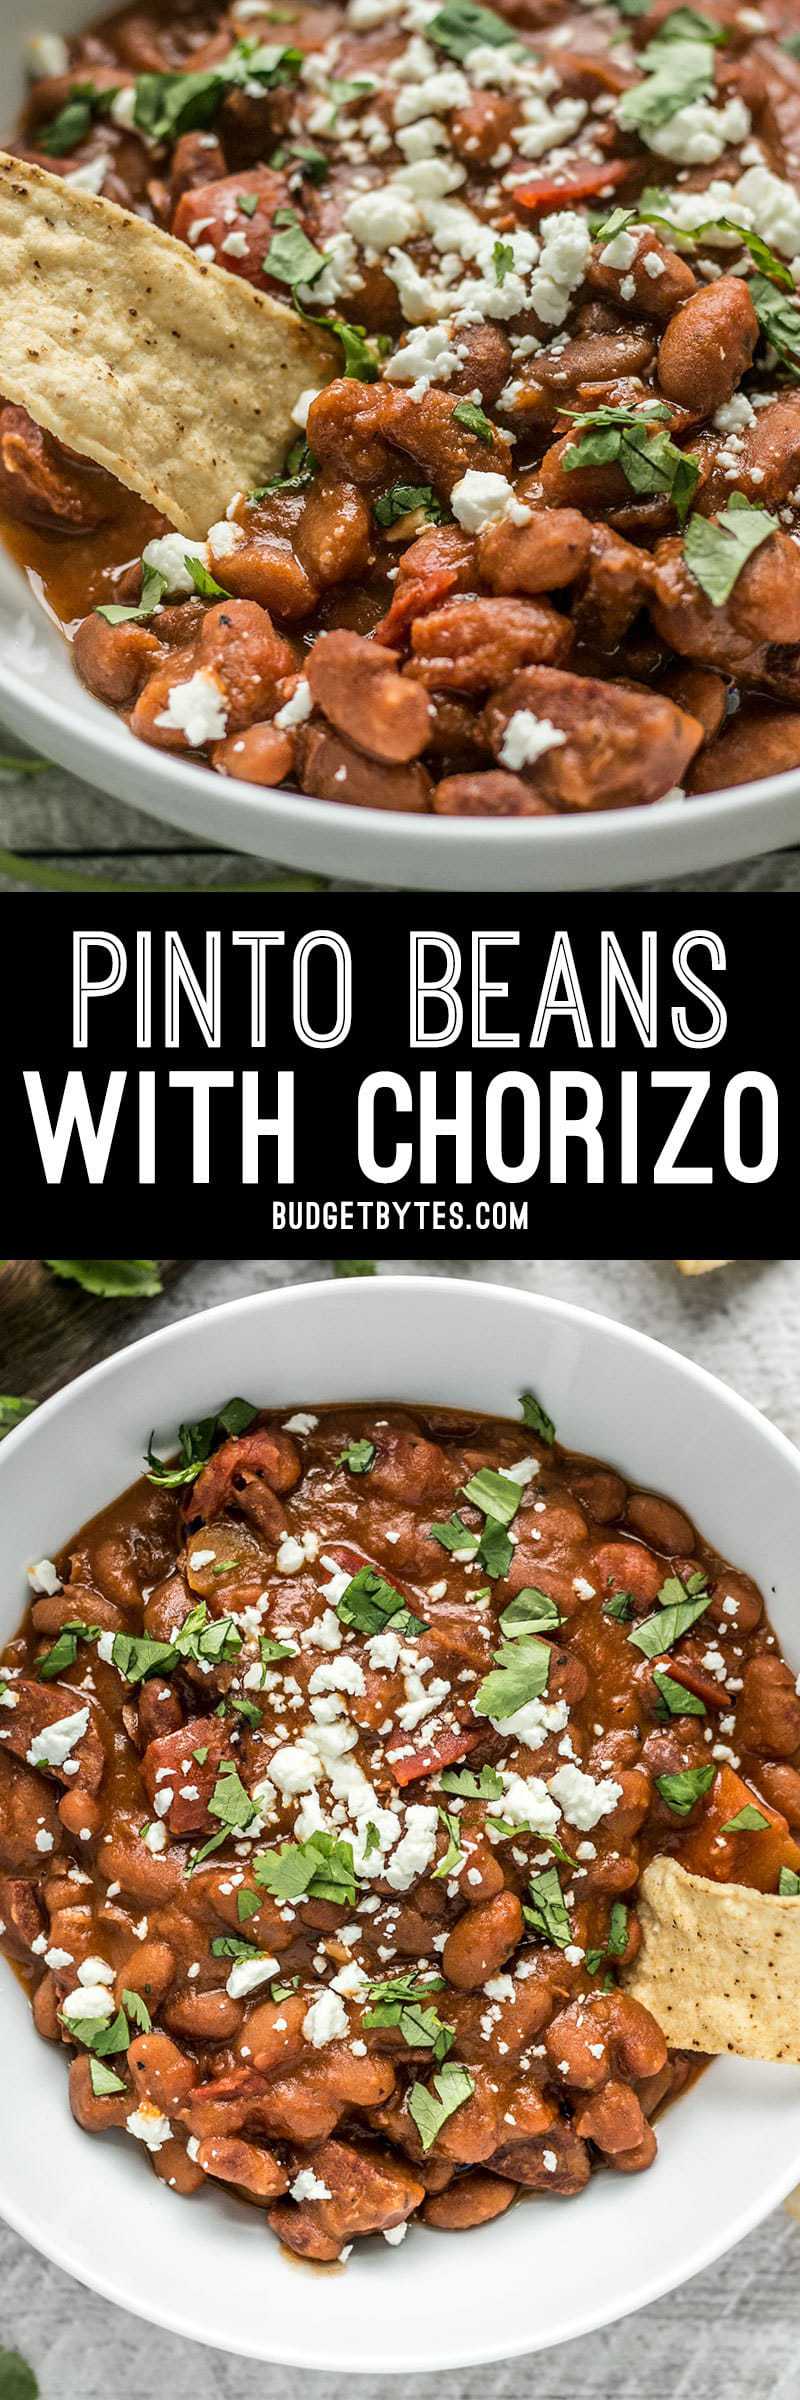 A little bit of Spanish chorizo is all it takes to turn a simple pot of beans into a rich and flavorful meal! BudgetBytes.com